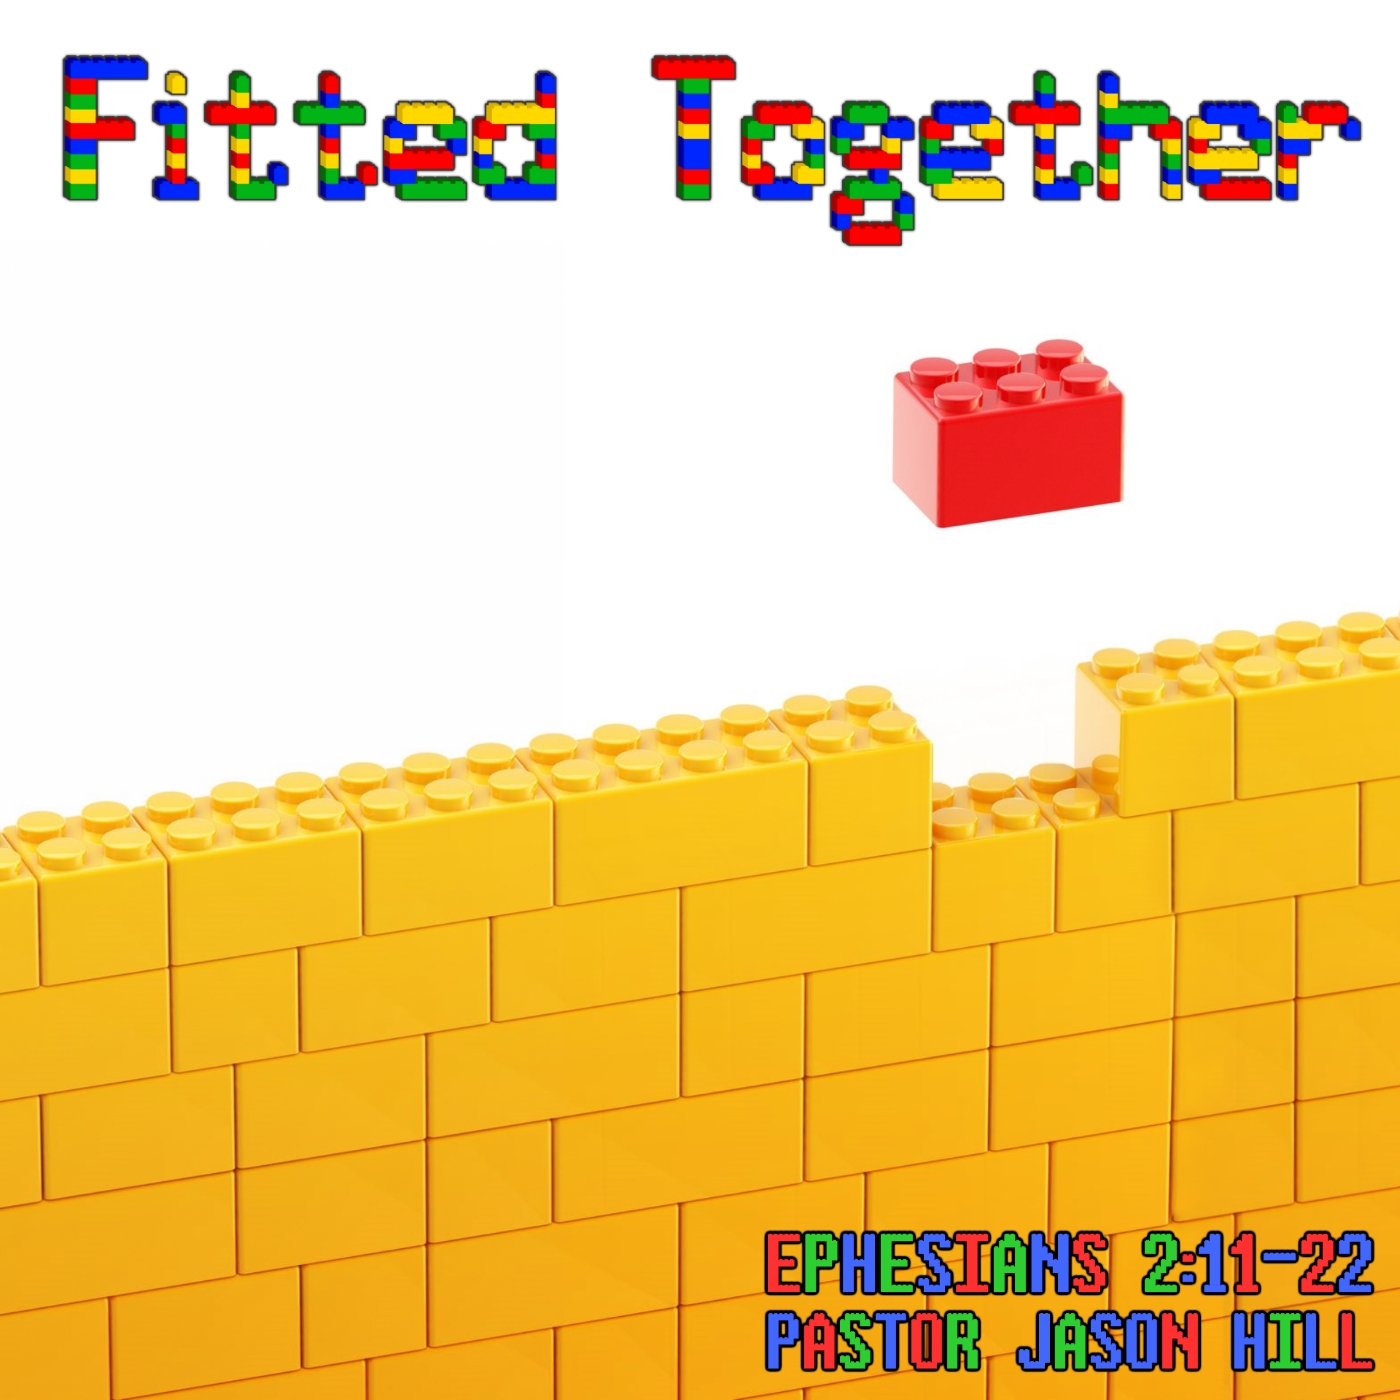 Ephesians 2:11-22 ”Fitted Together” w/ Pastor Jason Hill